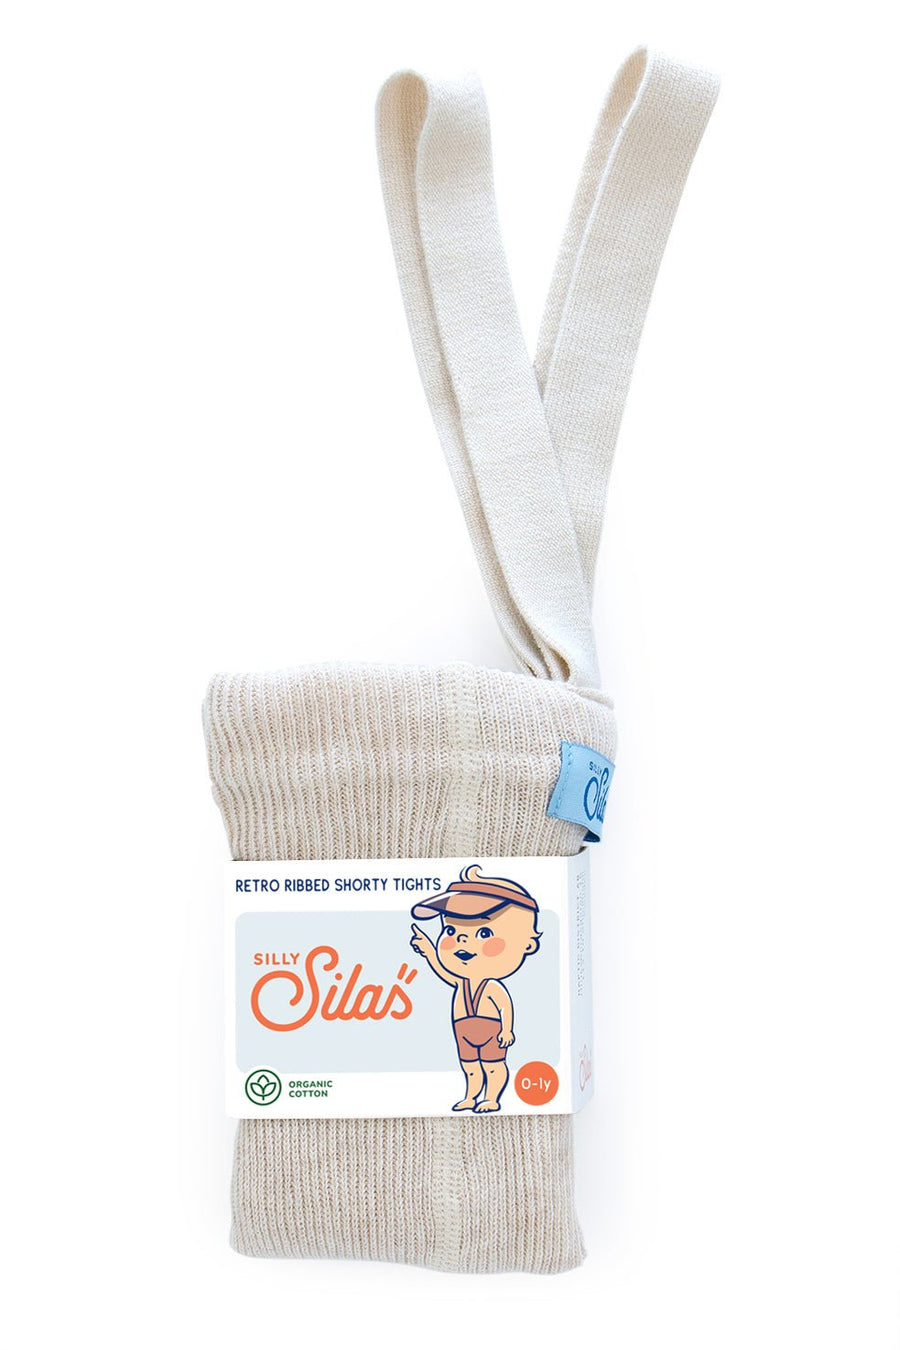 Shorty Cotton Tights by Silly Silas - OAT & OCHRE | Slow Fashion, Organic, Ethically-Made